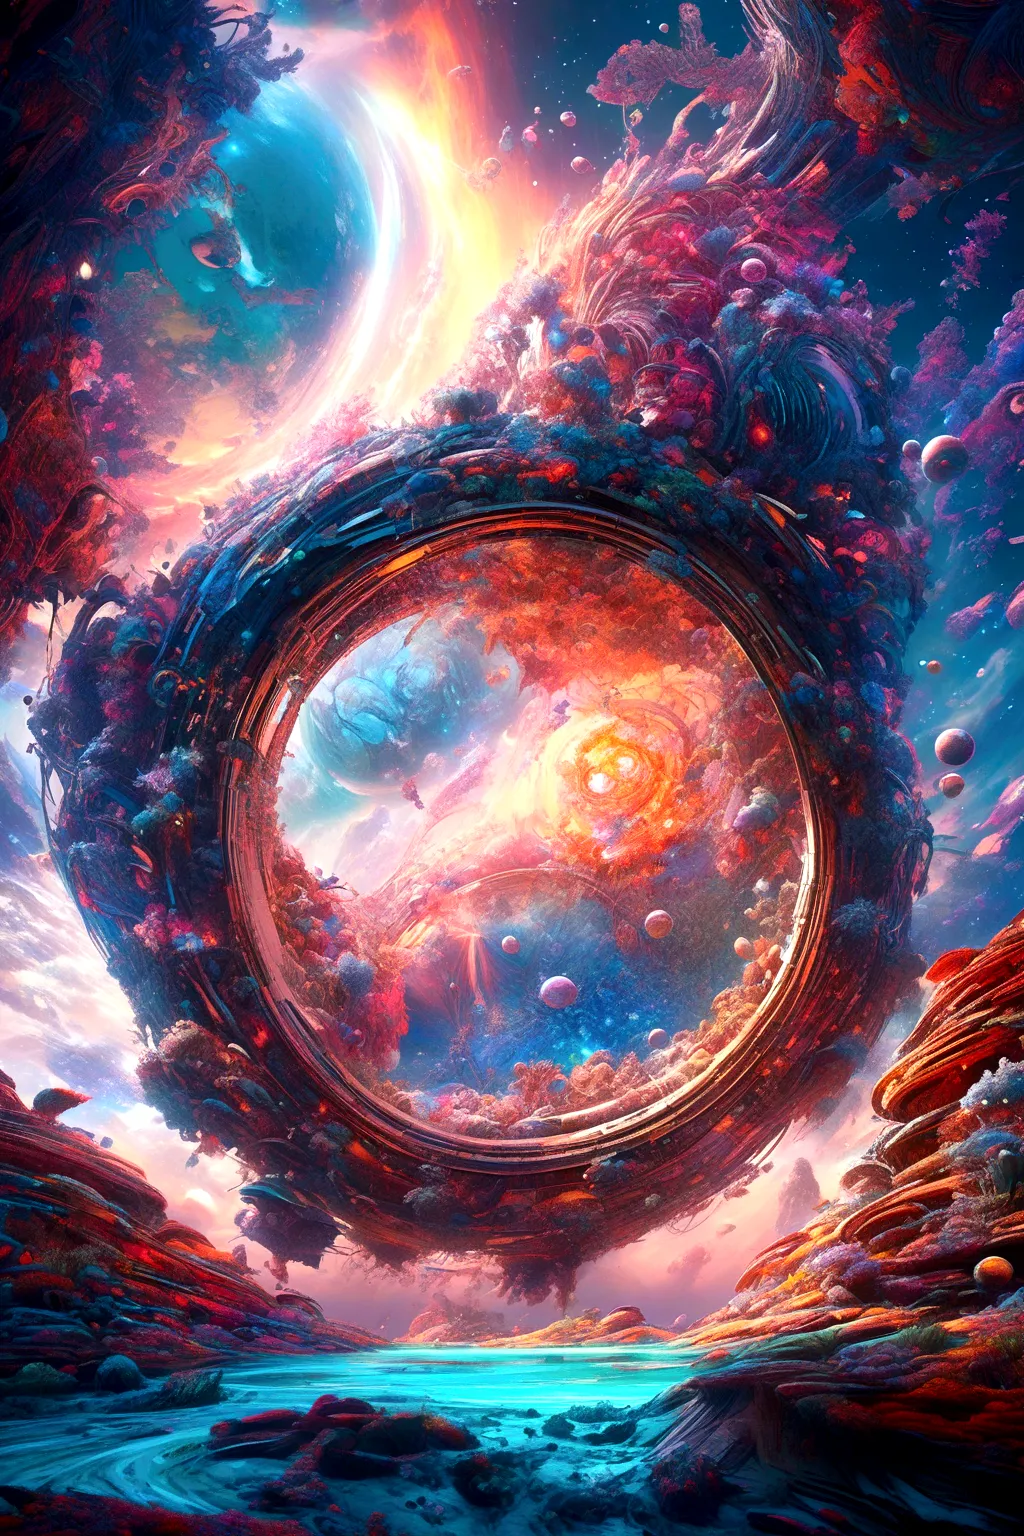 a highly detailed, cinematic illustration of a vast, otherworldly alien planet, enveloped in swirling cosmic winds, dramatic lig...